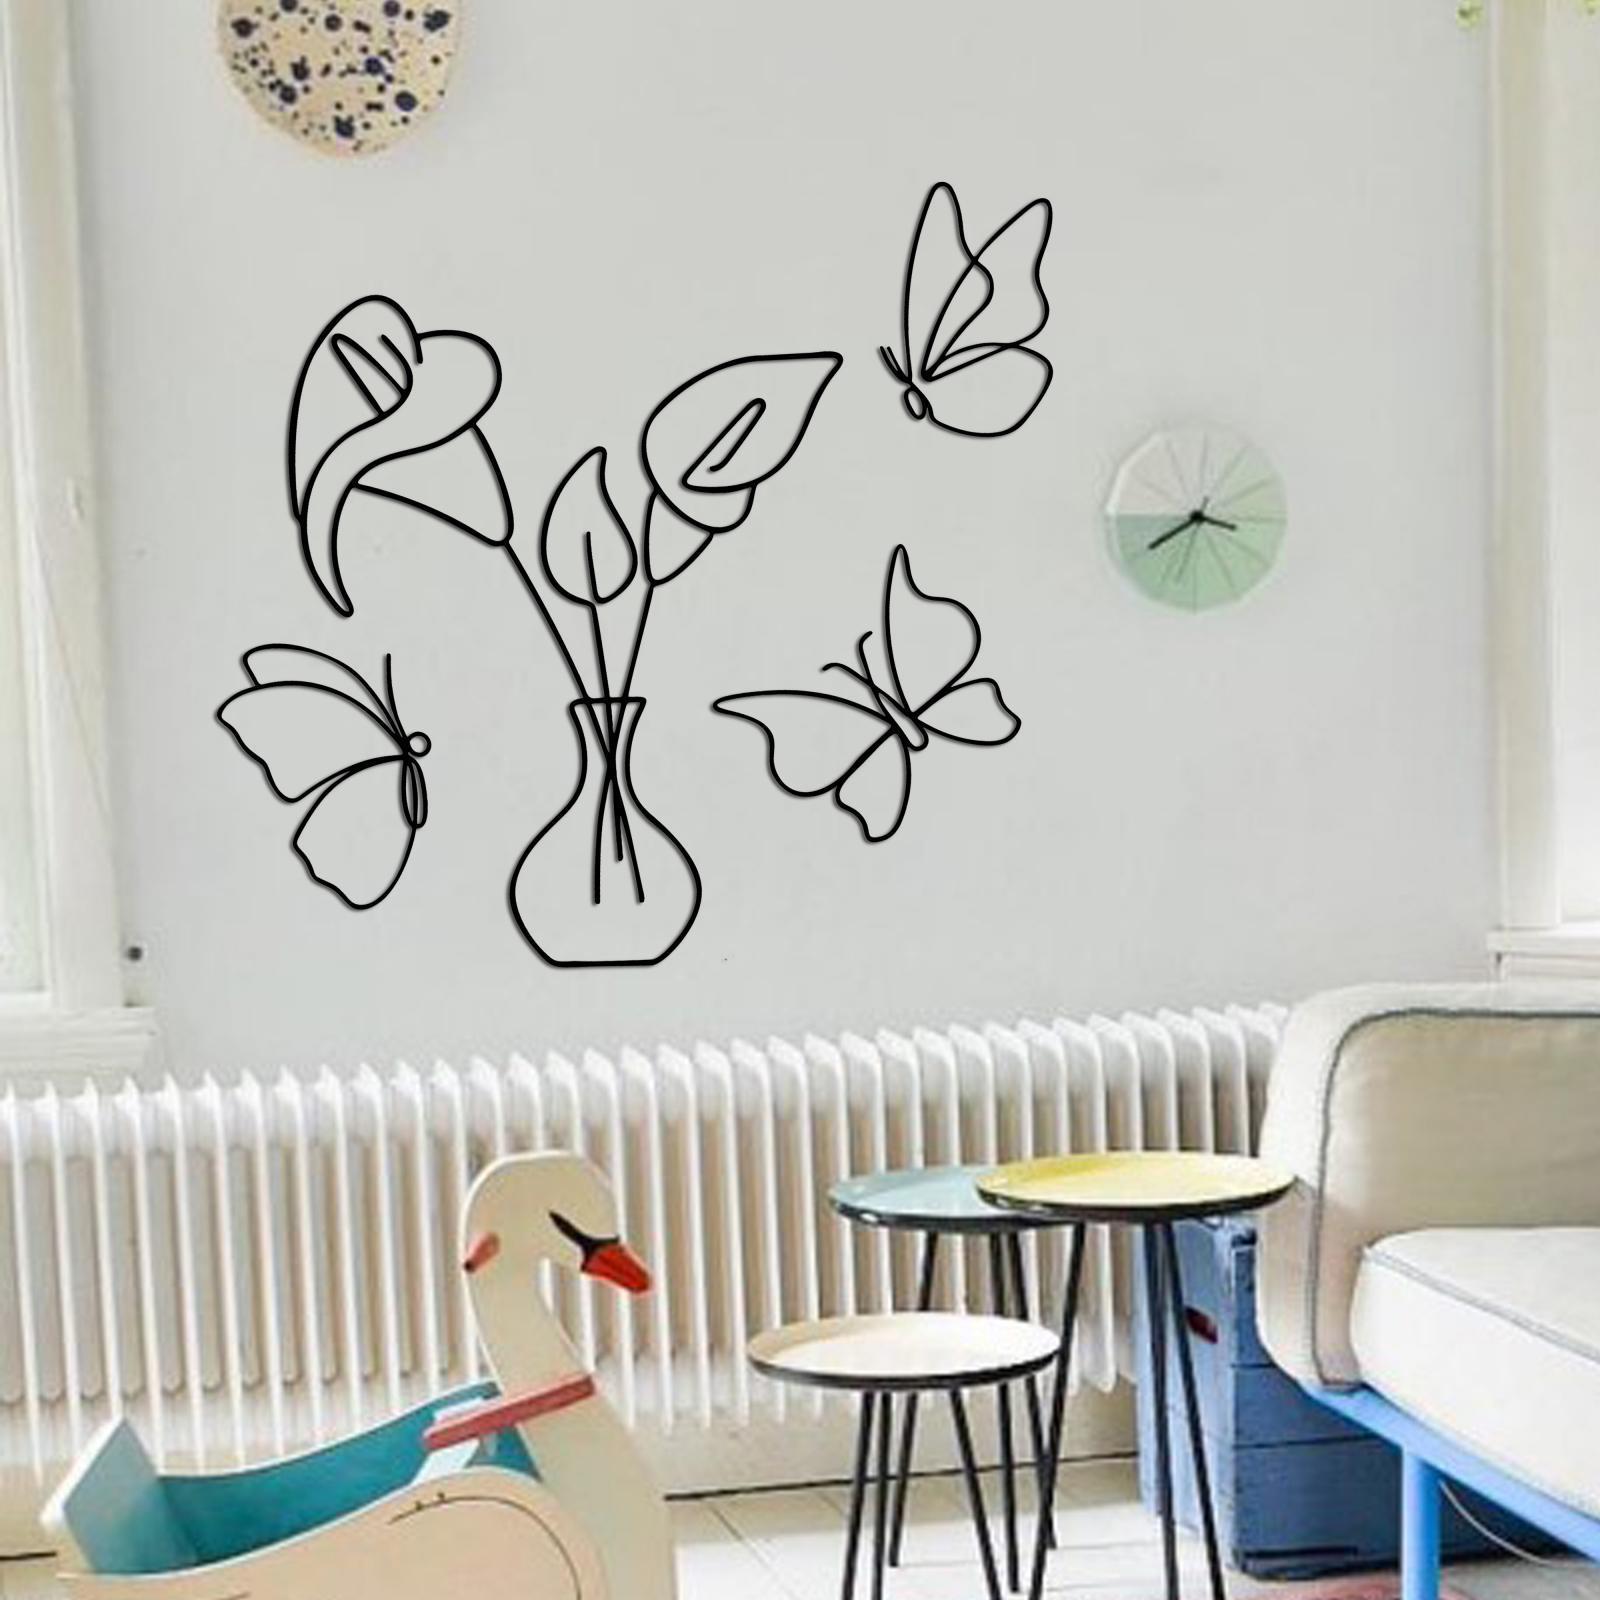 Vase Modern Minimalist Butterfly Wall Decor for Cafe Bedroom Office